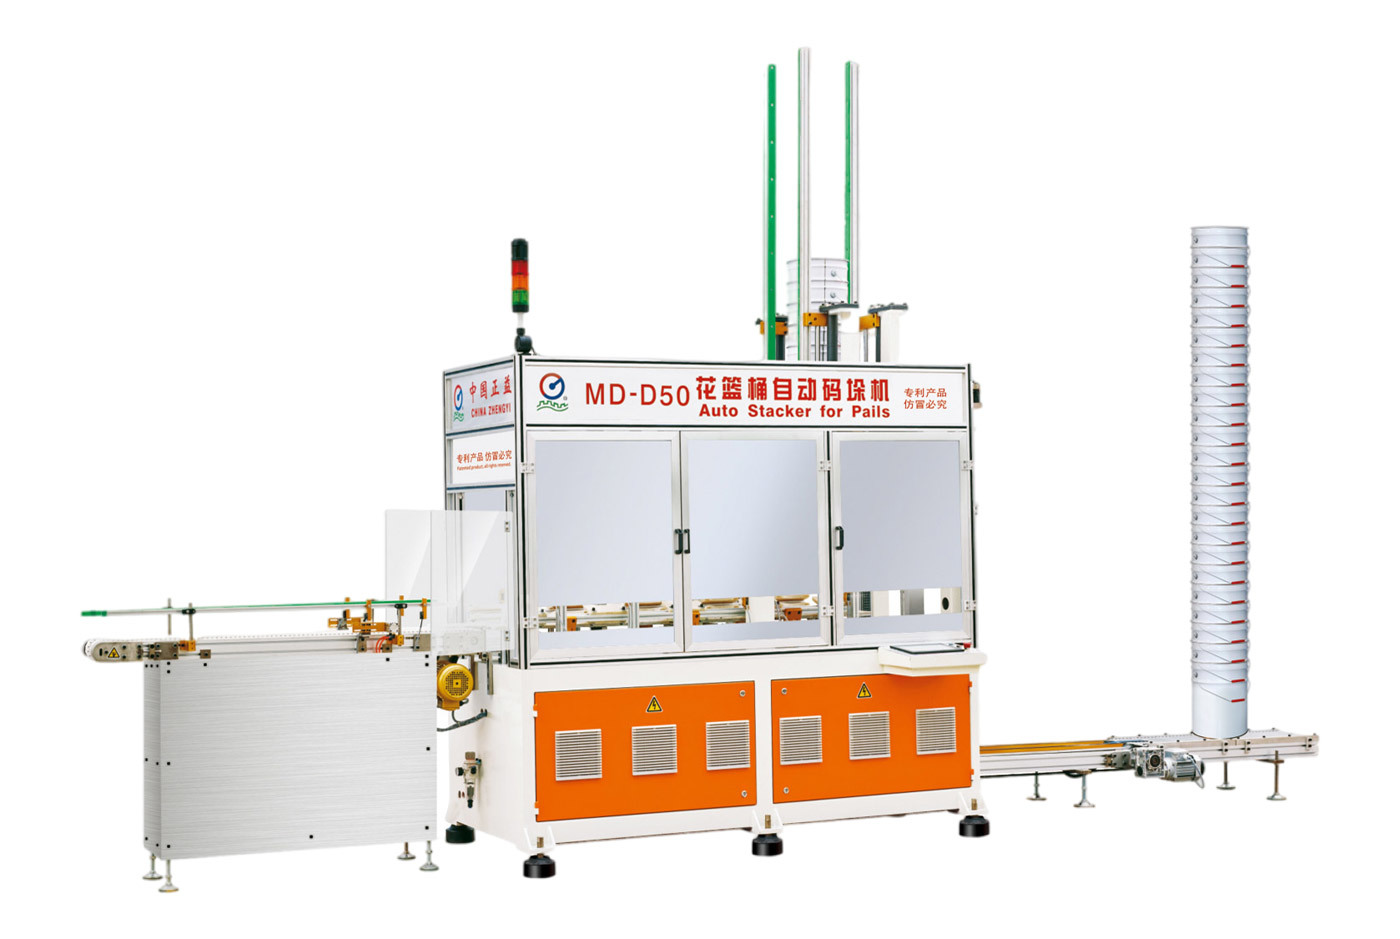 Flower Basket Bucket Automatic Palletizing and Wrapping Machine MD-D50&GB-D50 Tangshan Wenfang